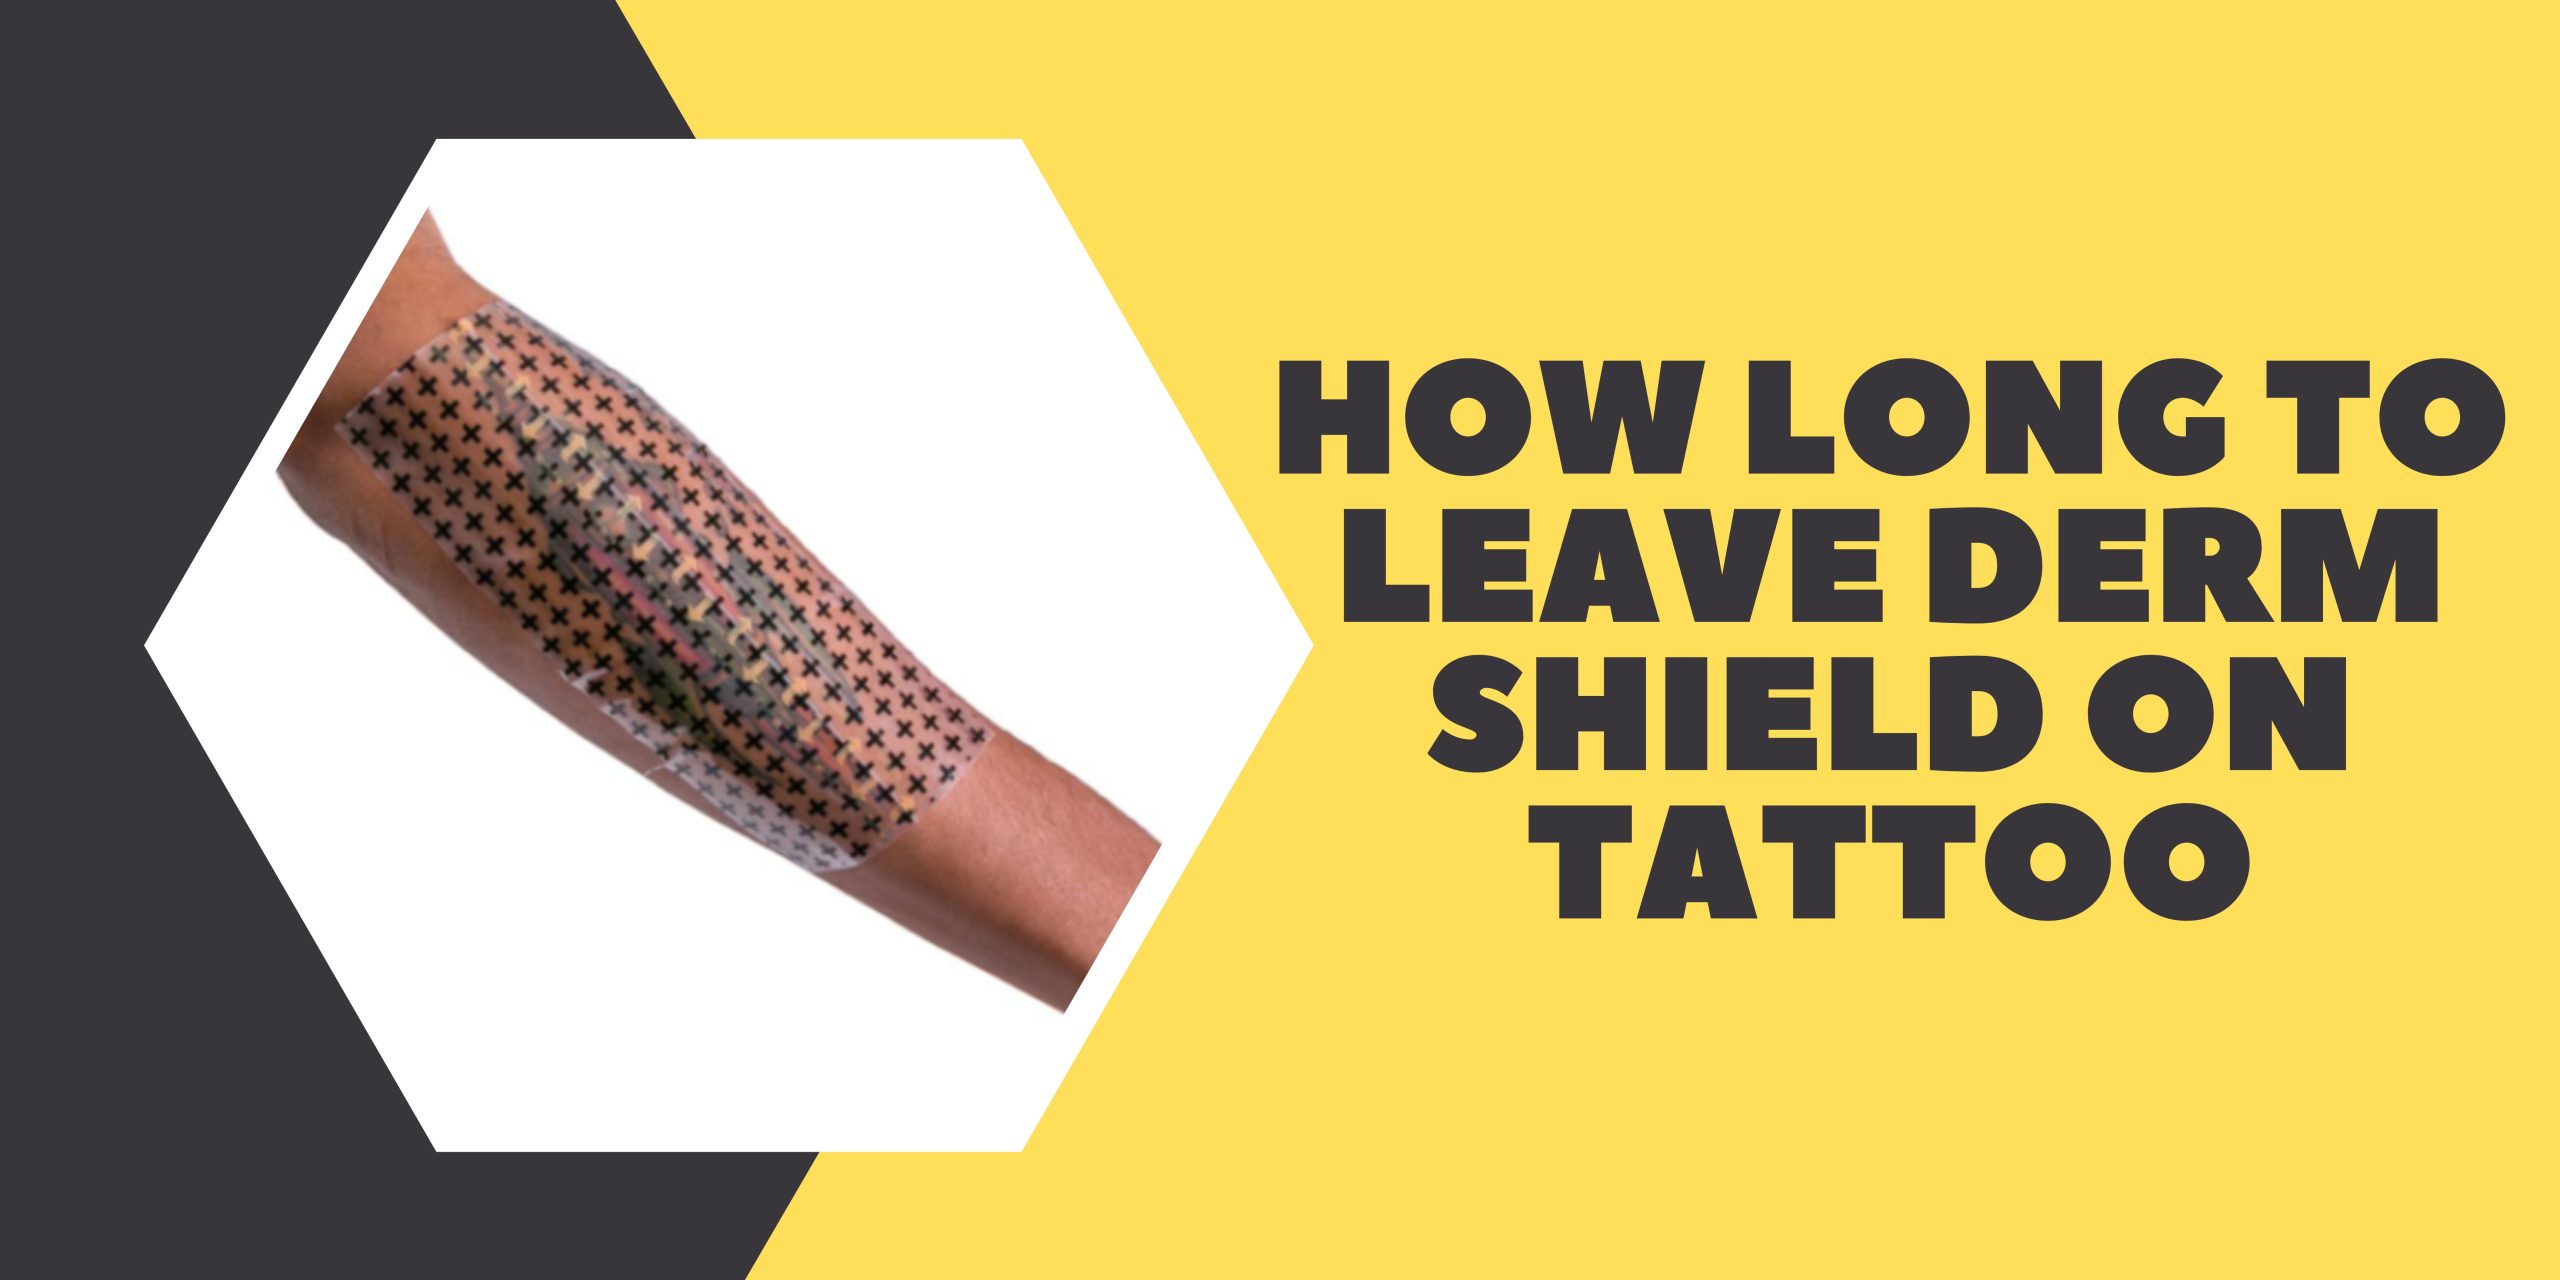 how long to leave derm shield on tattoo